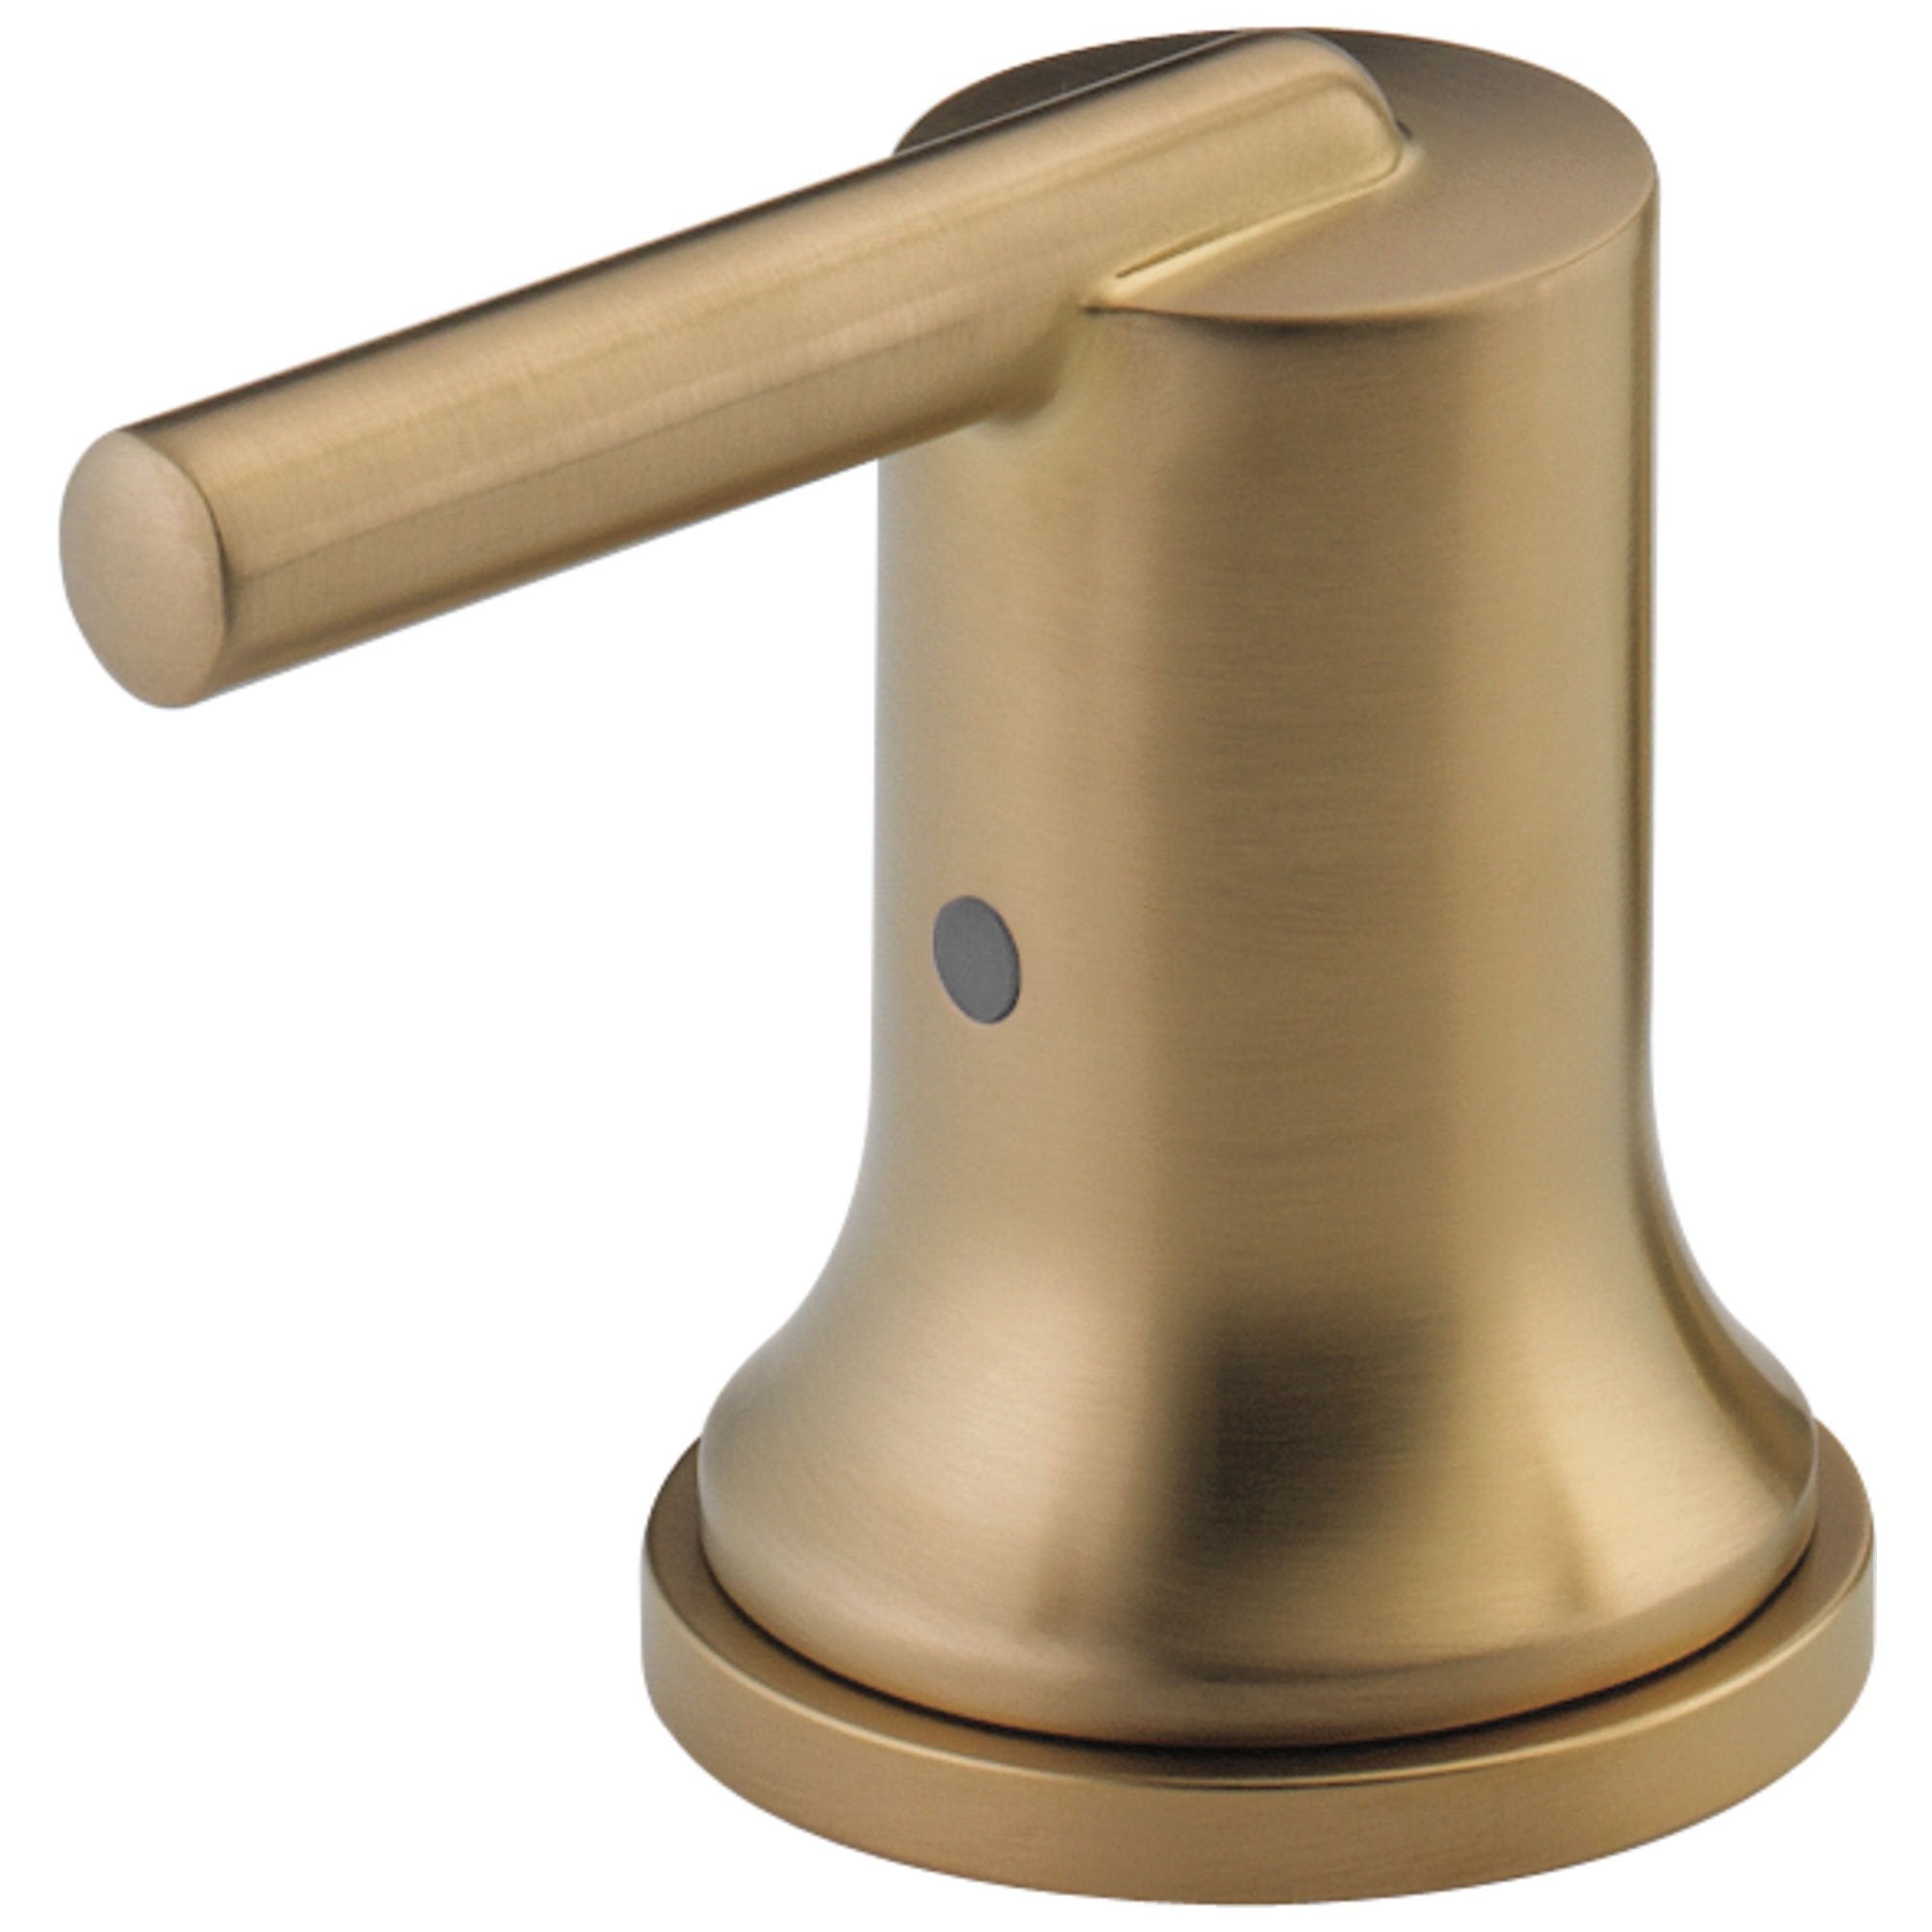 Delta Trinsic Collection Champagne Bronze Finish Roman Tub Metal Lever Handles - Quantity 2 Included DH659CZ